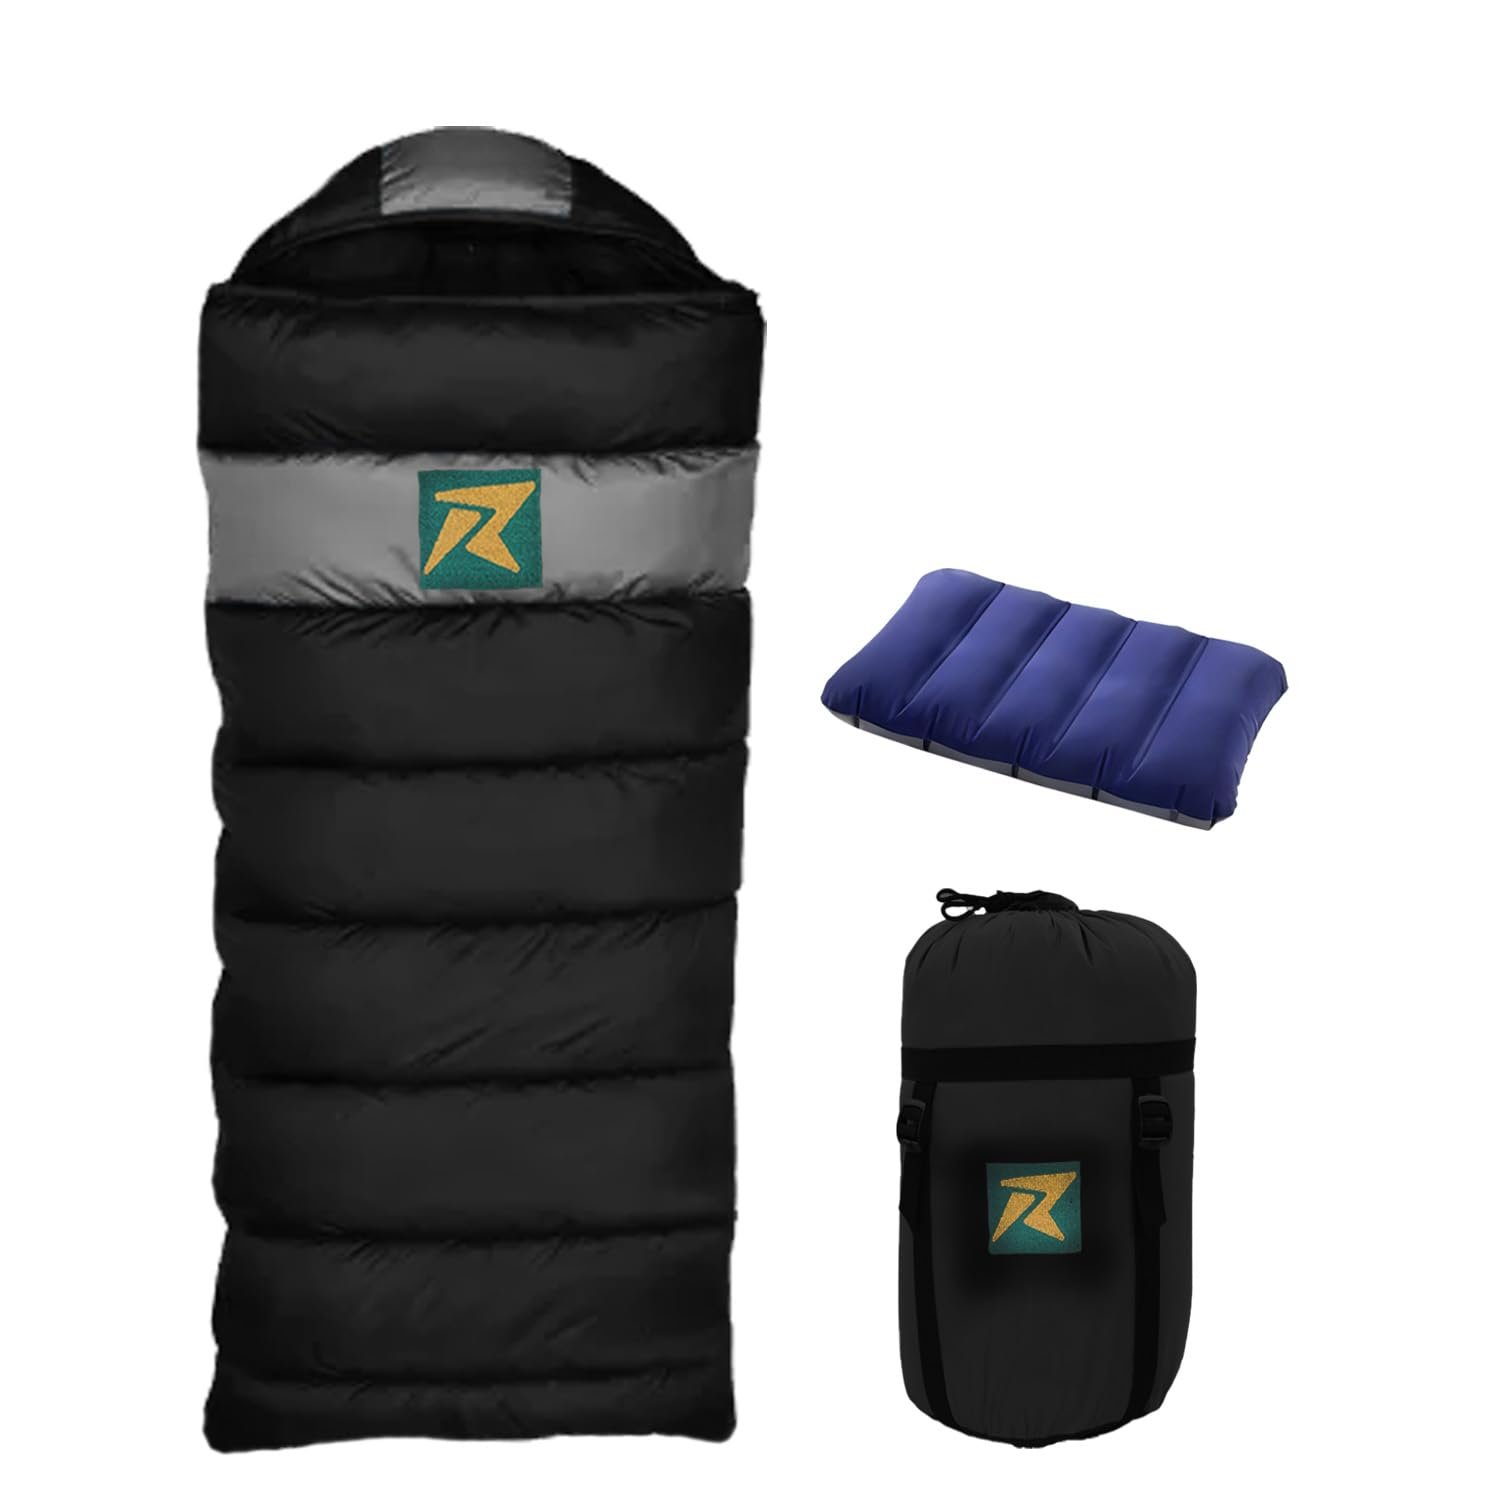 Rocksport Karakoram -5°C to +5°C Sleeping Bag for Adults,Camping, Hiking, Indoor & Outdoor with Extra Fur Lining for Winters